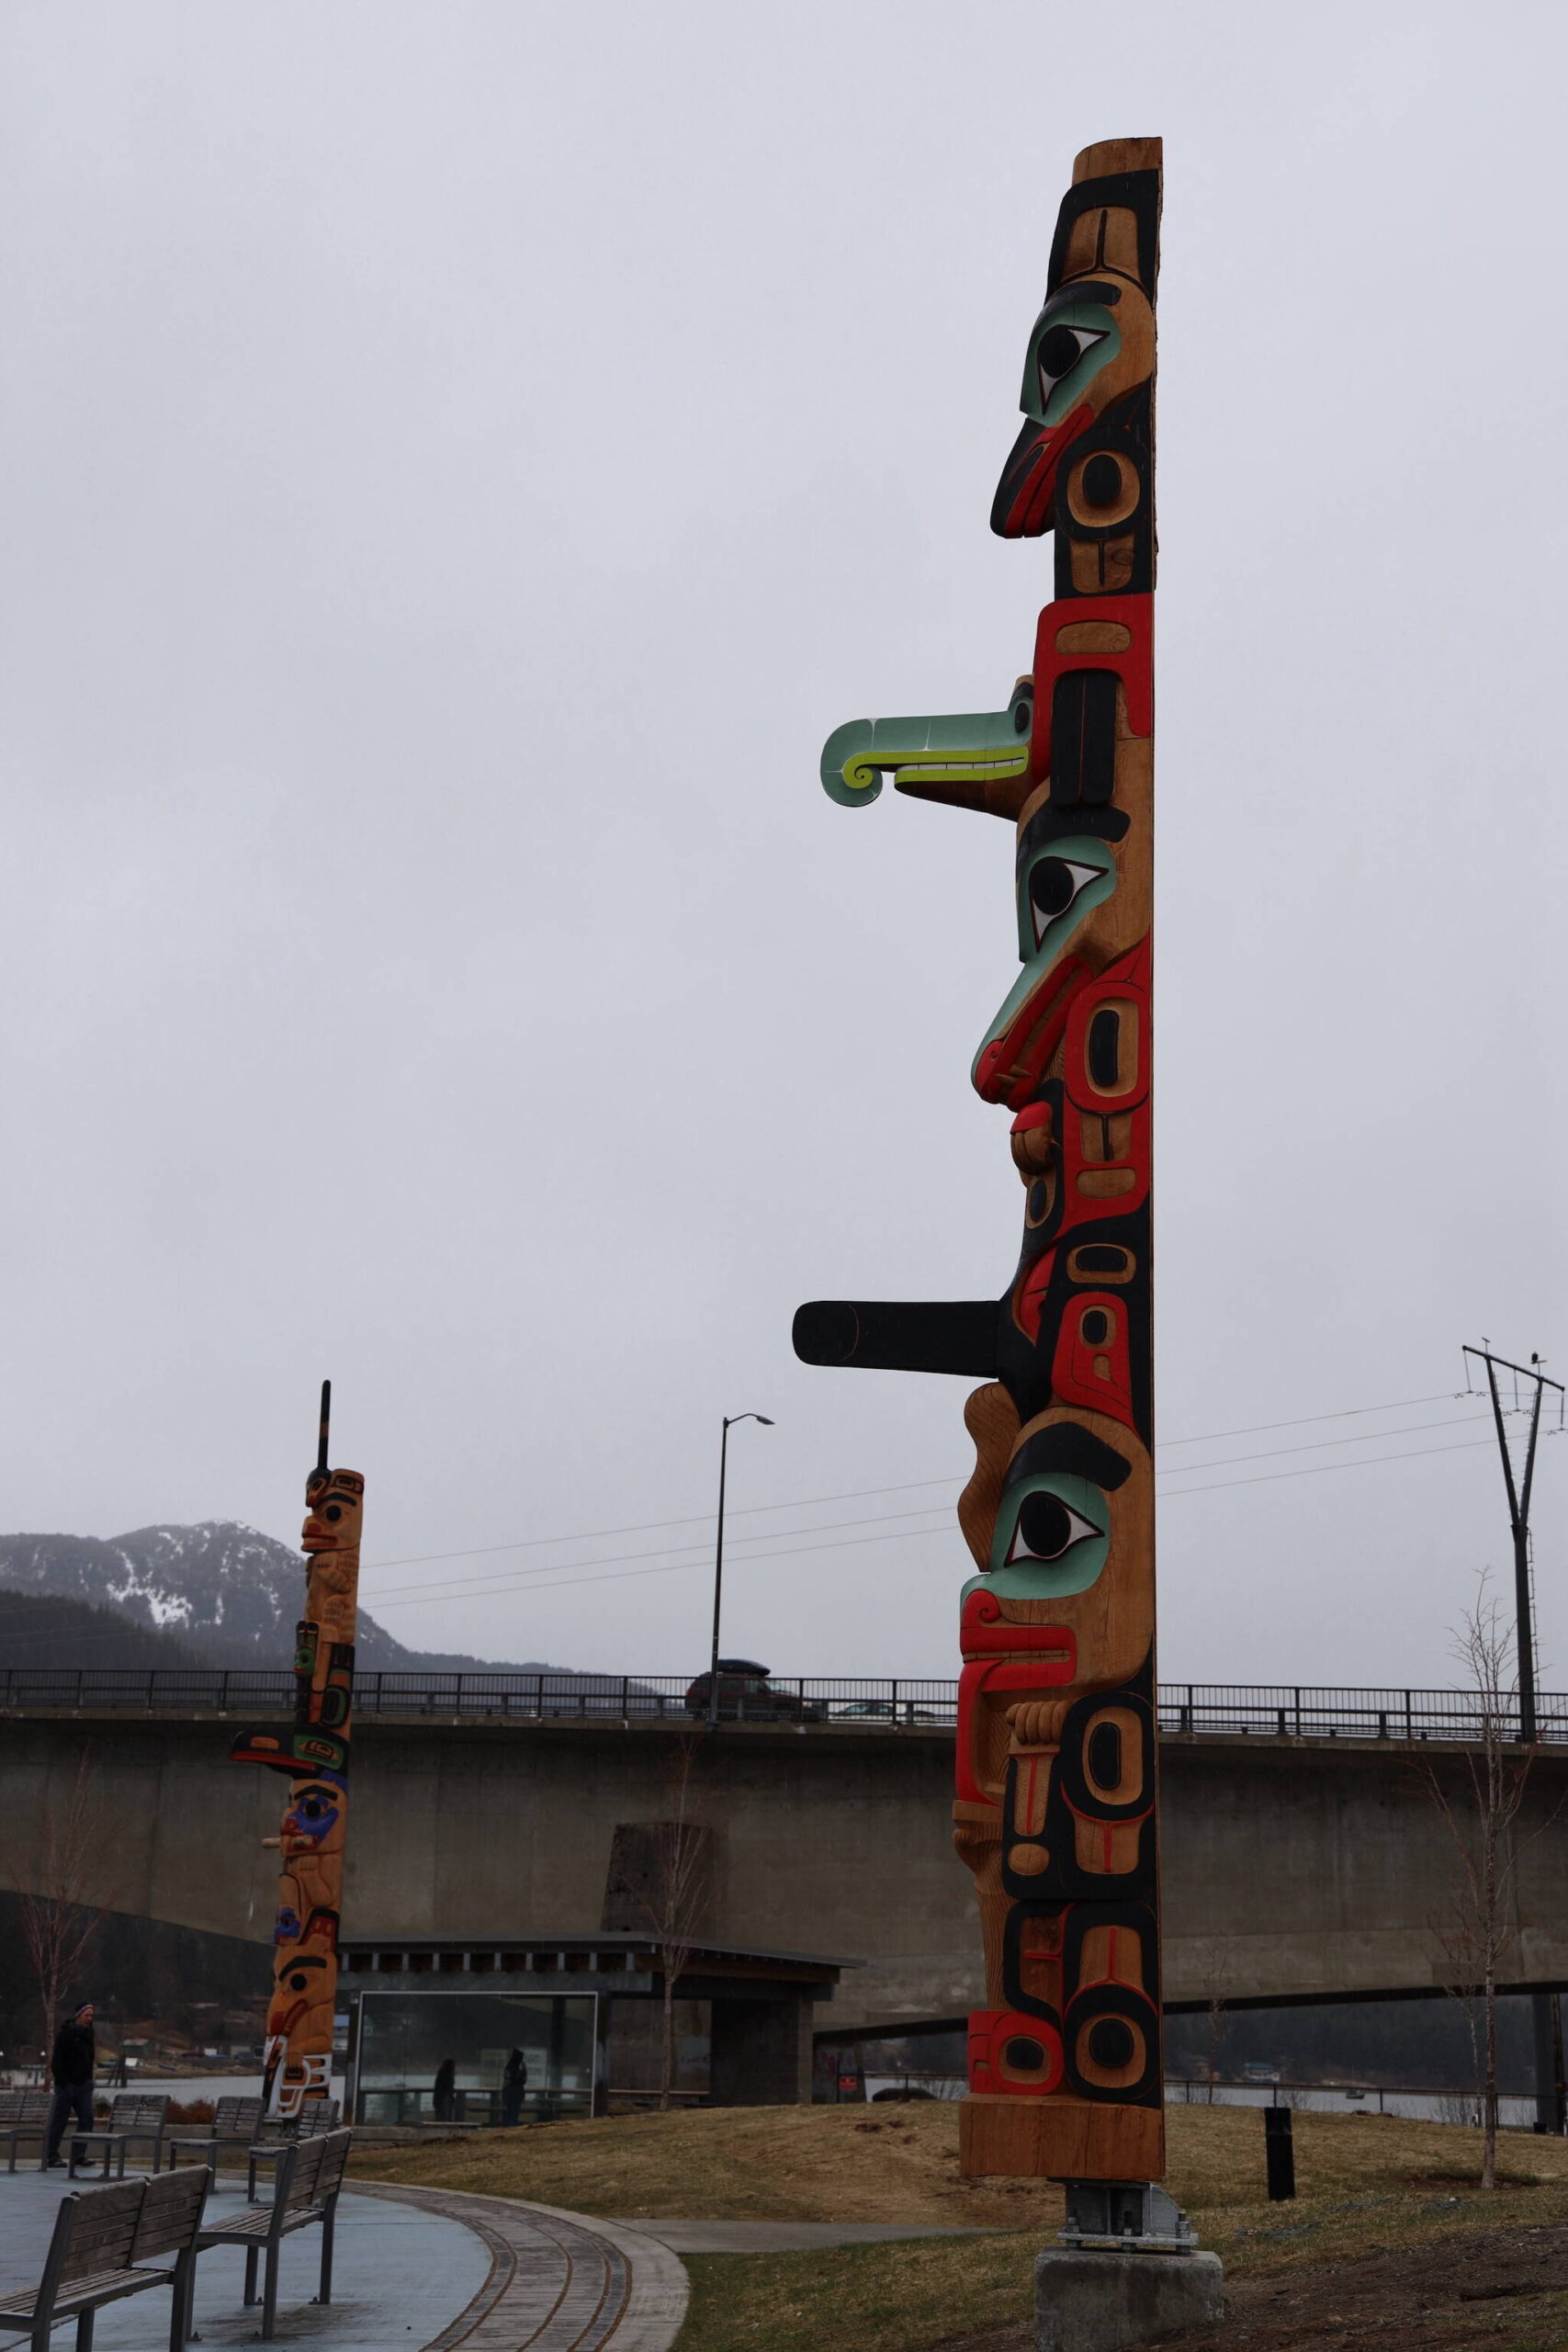 A totem pole by Tsimshian carver Gyibaawm Laxha David Robert Boxley stands tall during a light drizzle Saturday afternoon after the dedication ceremony. (Clarise Larson / Juneau Empire)